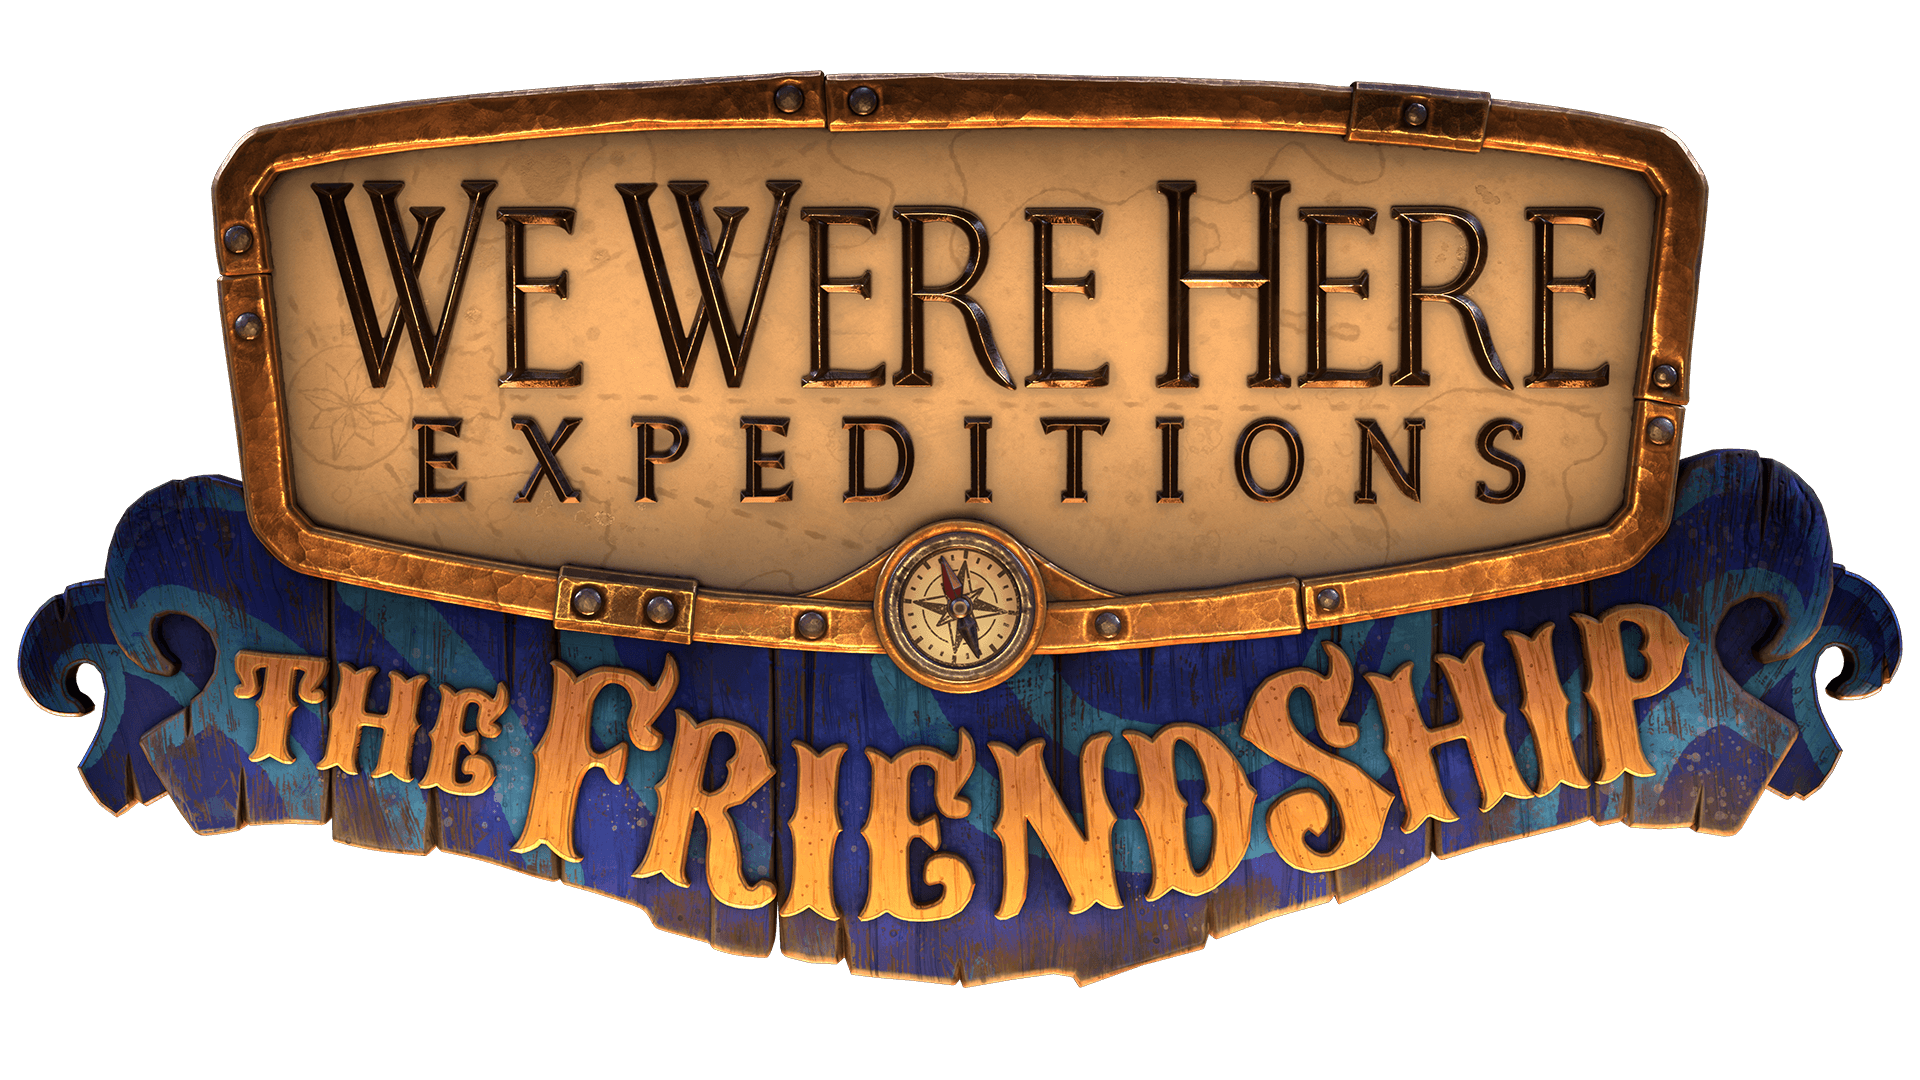 We Were Here Expeditions: The FriendShip now available for PS5